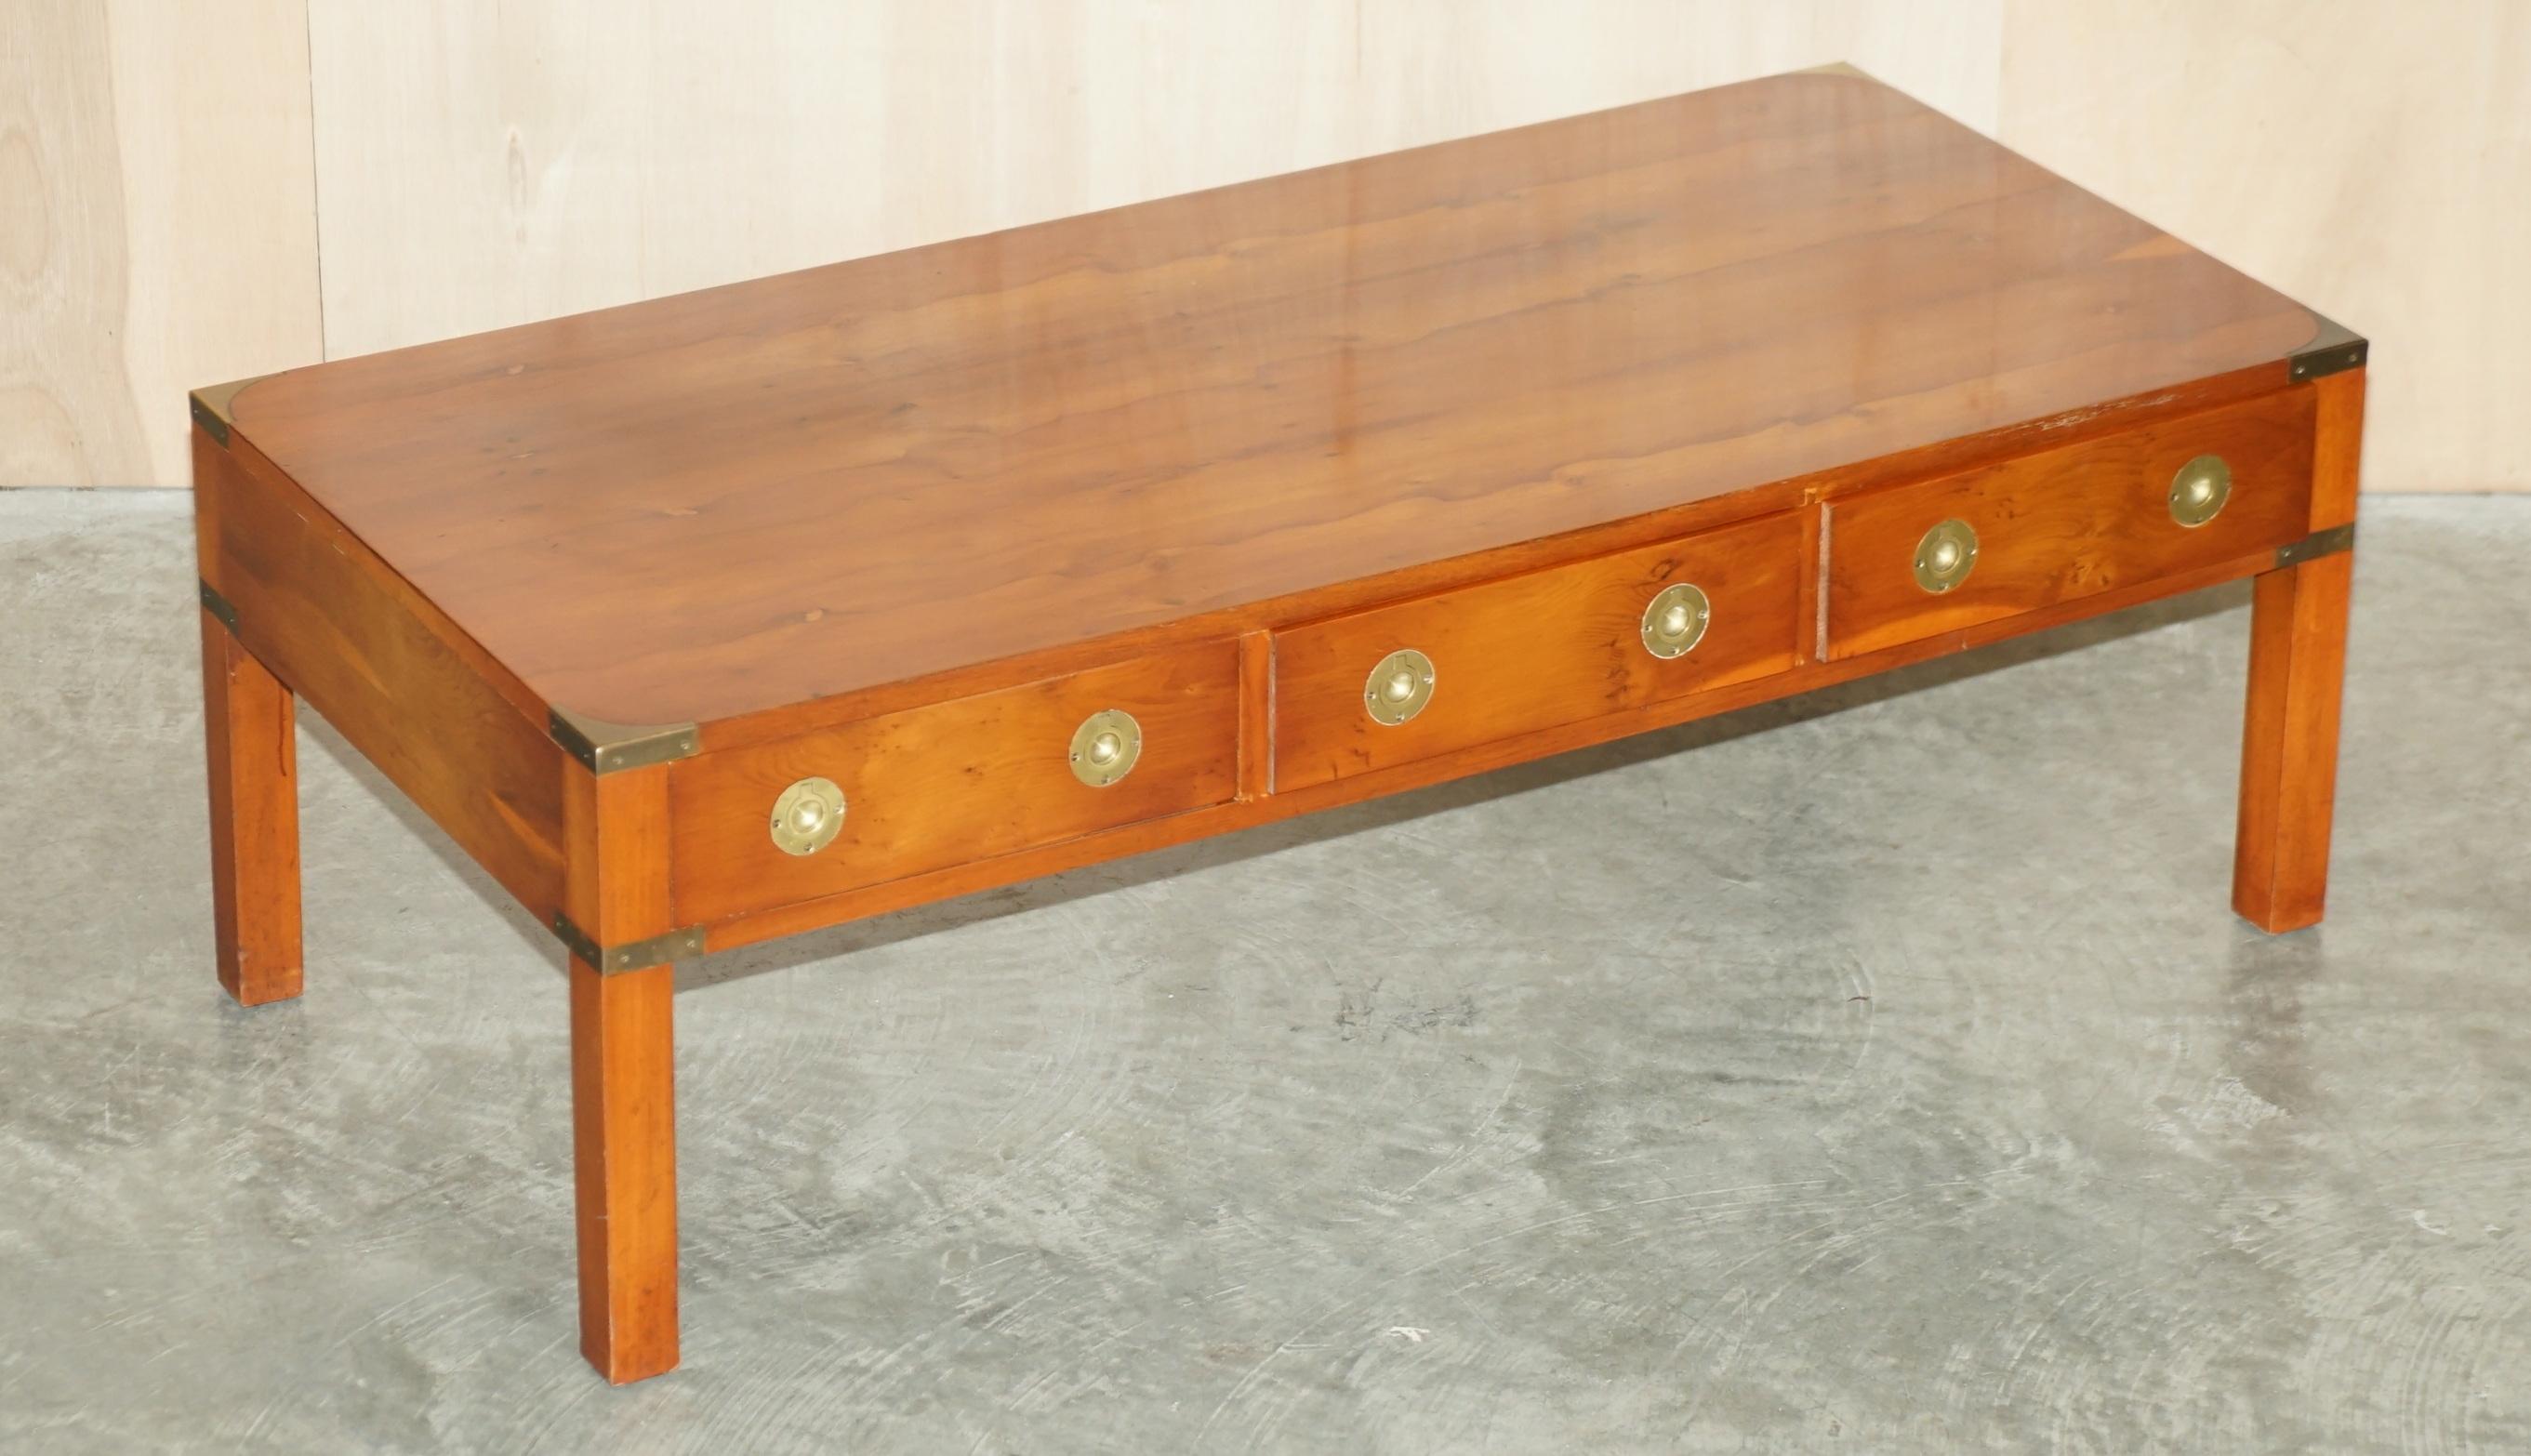 We are delighted to offer for sale this vintage collectable Burr Yew wood and Brass Bradley Furniture Military Campaign three drawer coffee table

This piece was made by Bradley furniture who were a very fine firm, they have used choice cuts of